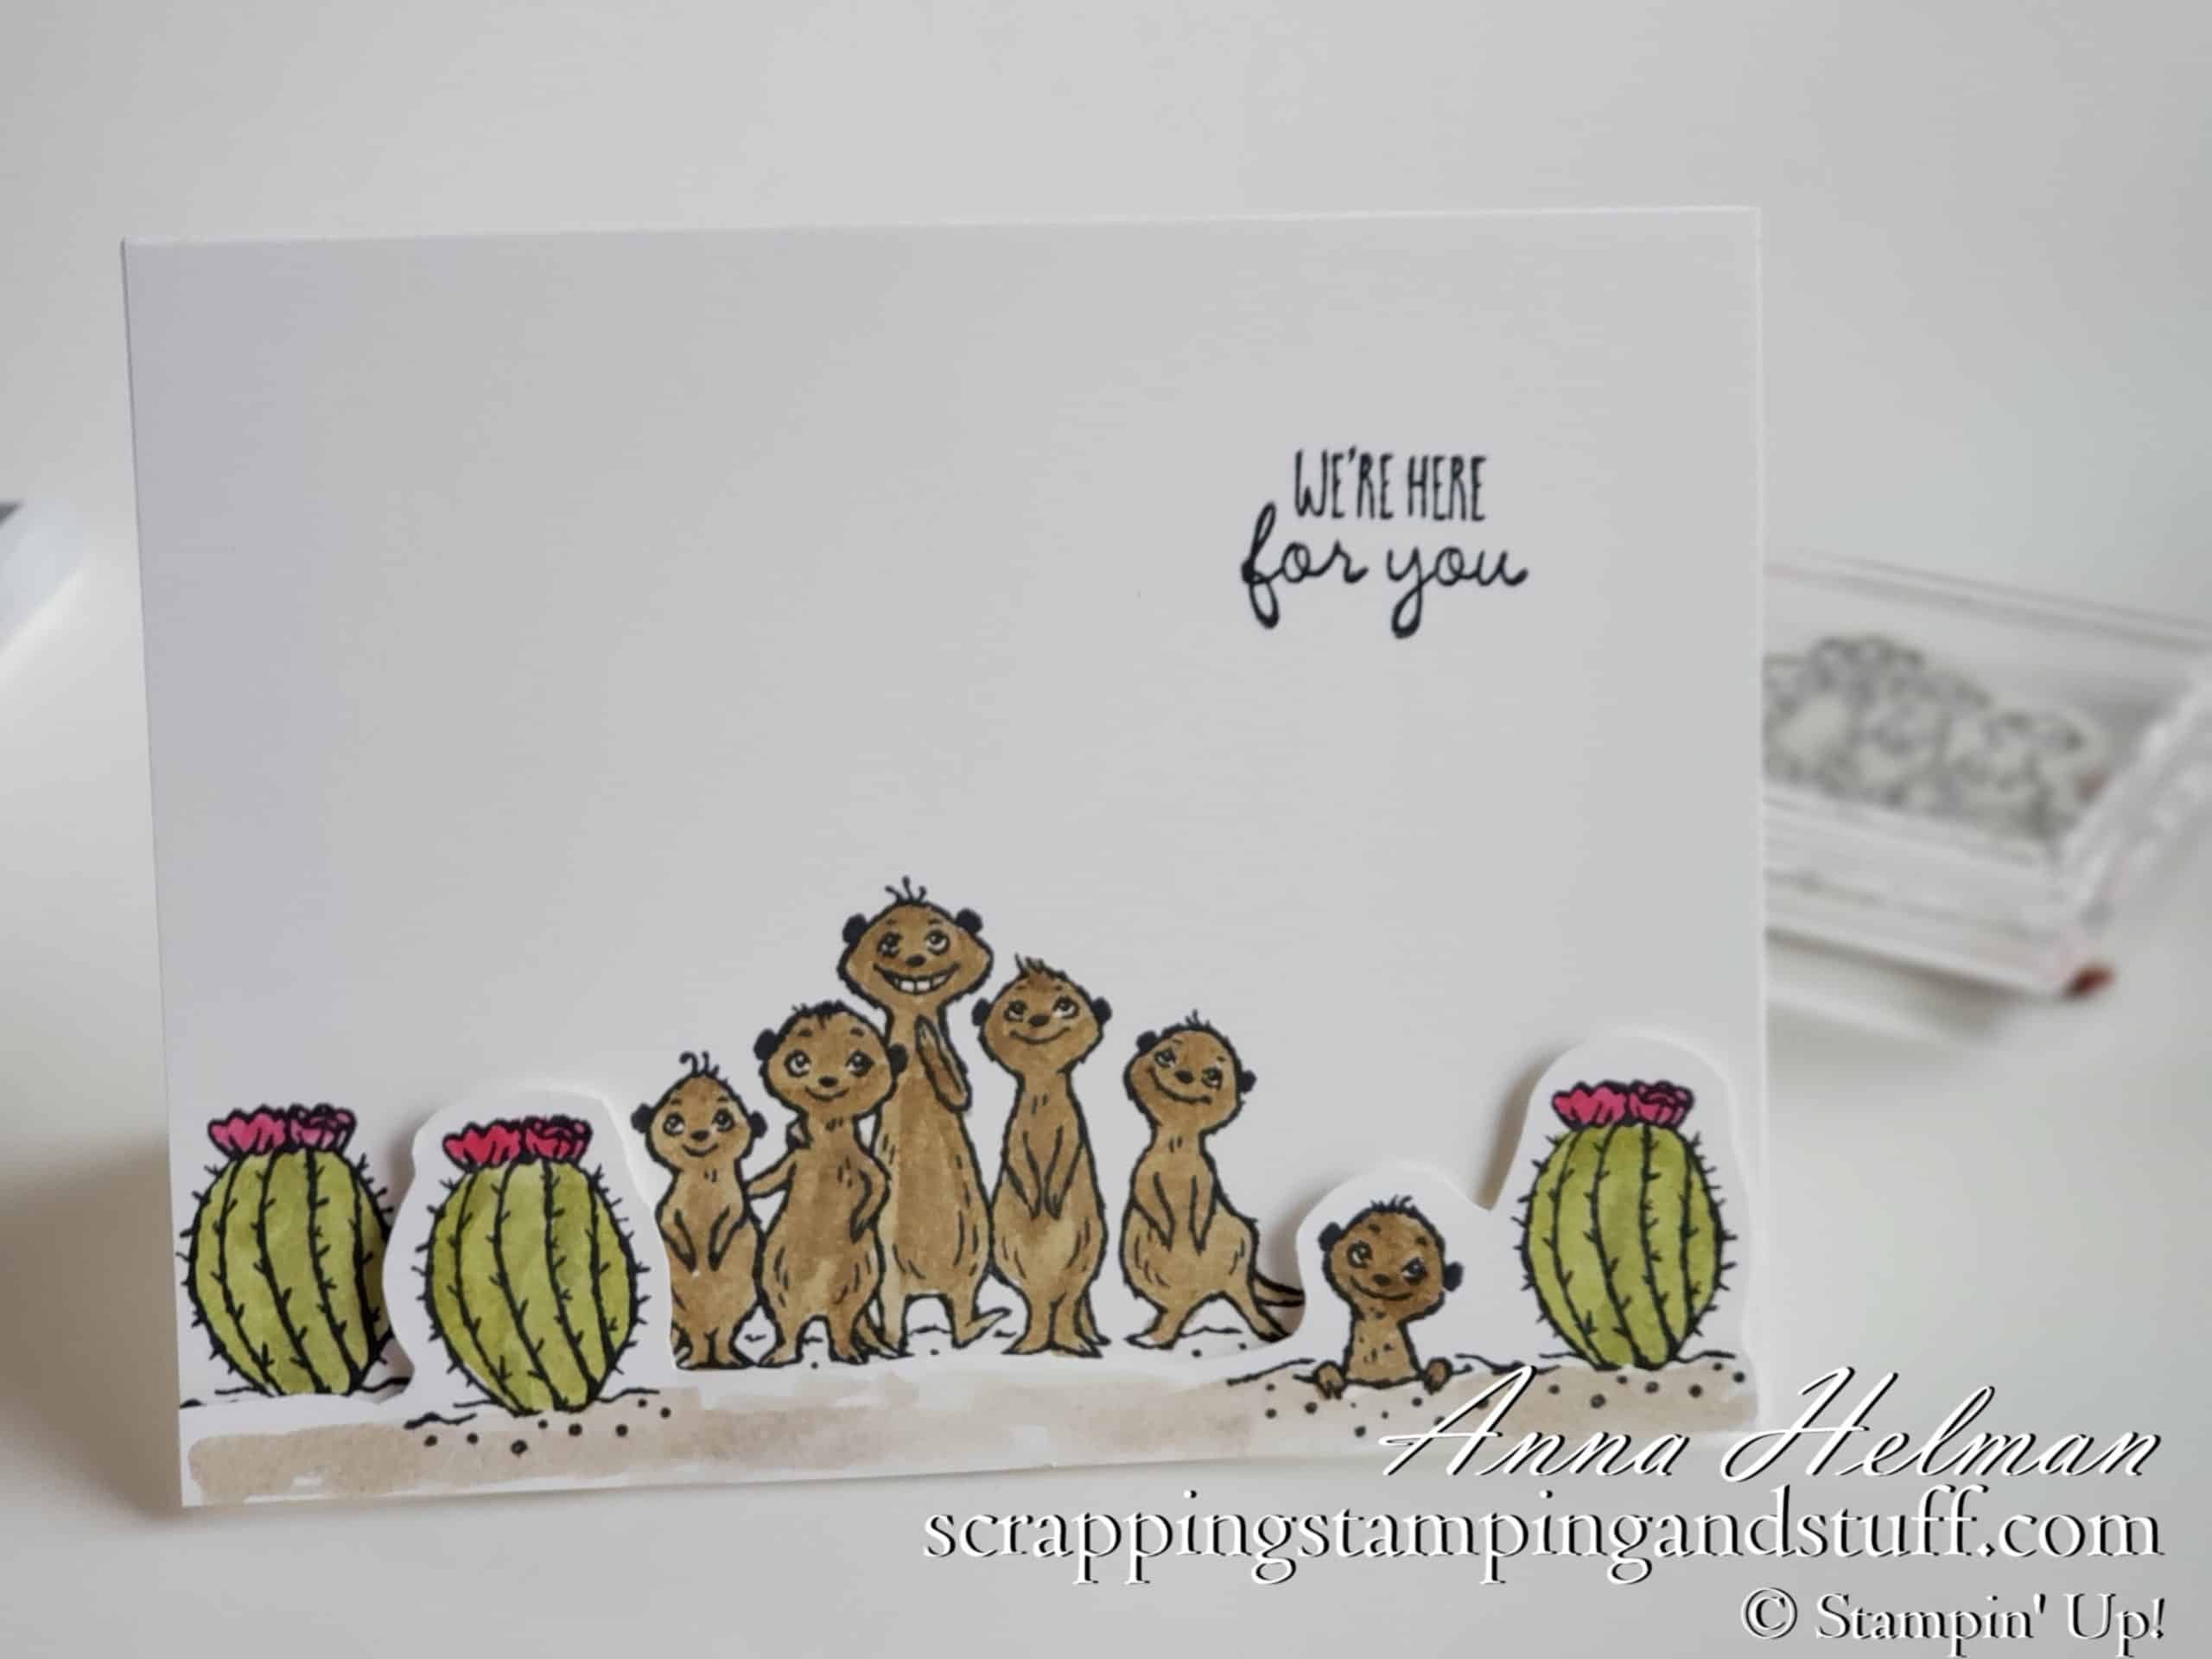 Full of Cuteness! Stampin Up The Gangs All Meer